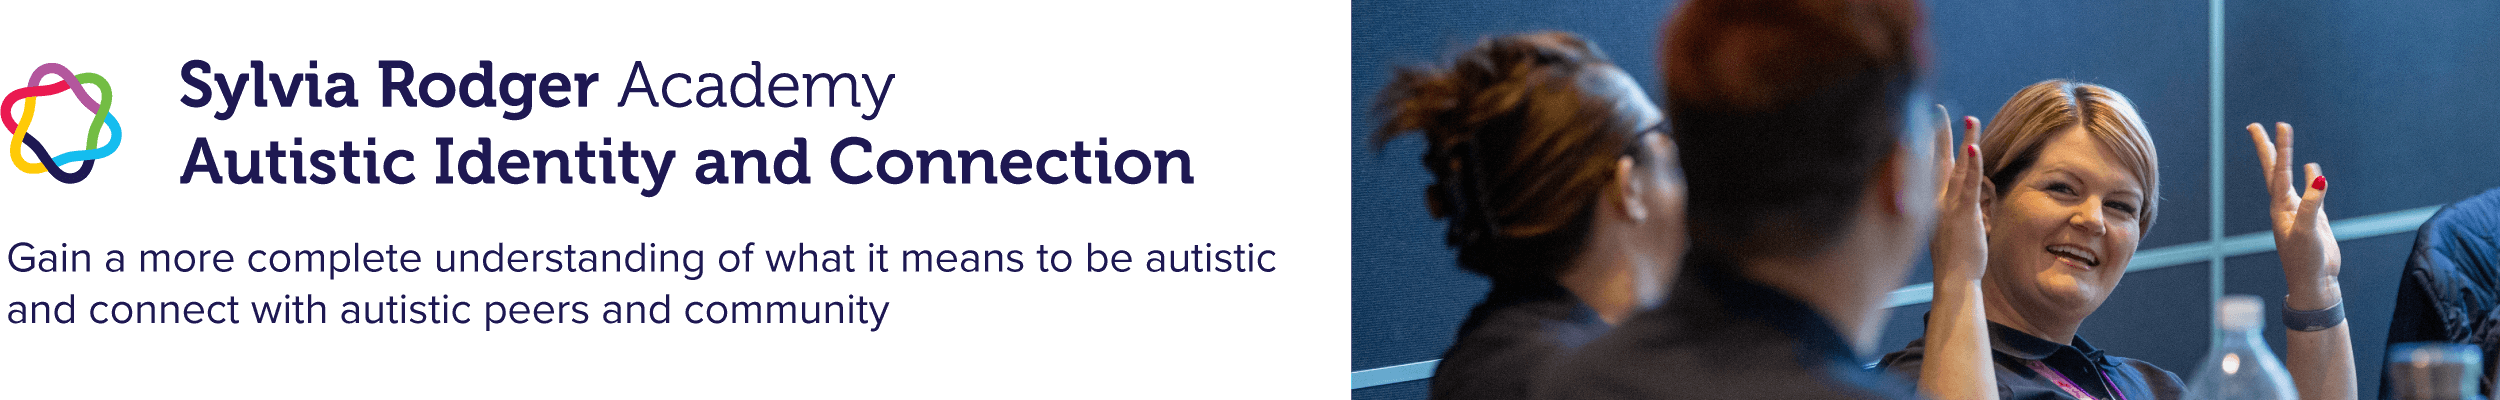 Sylvia Rodger Academy Autistic Identity and Connection. Gain a more complete understanding of what it means to be autistic and connect with autistic peers and community